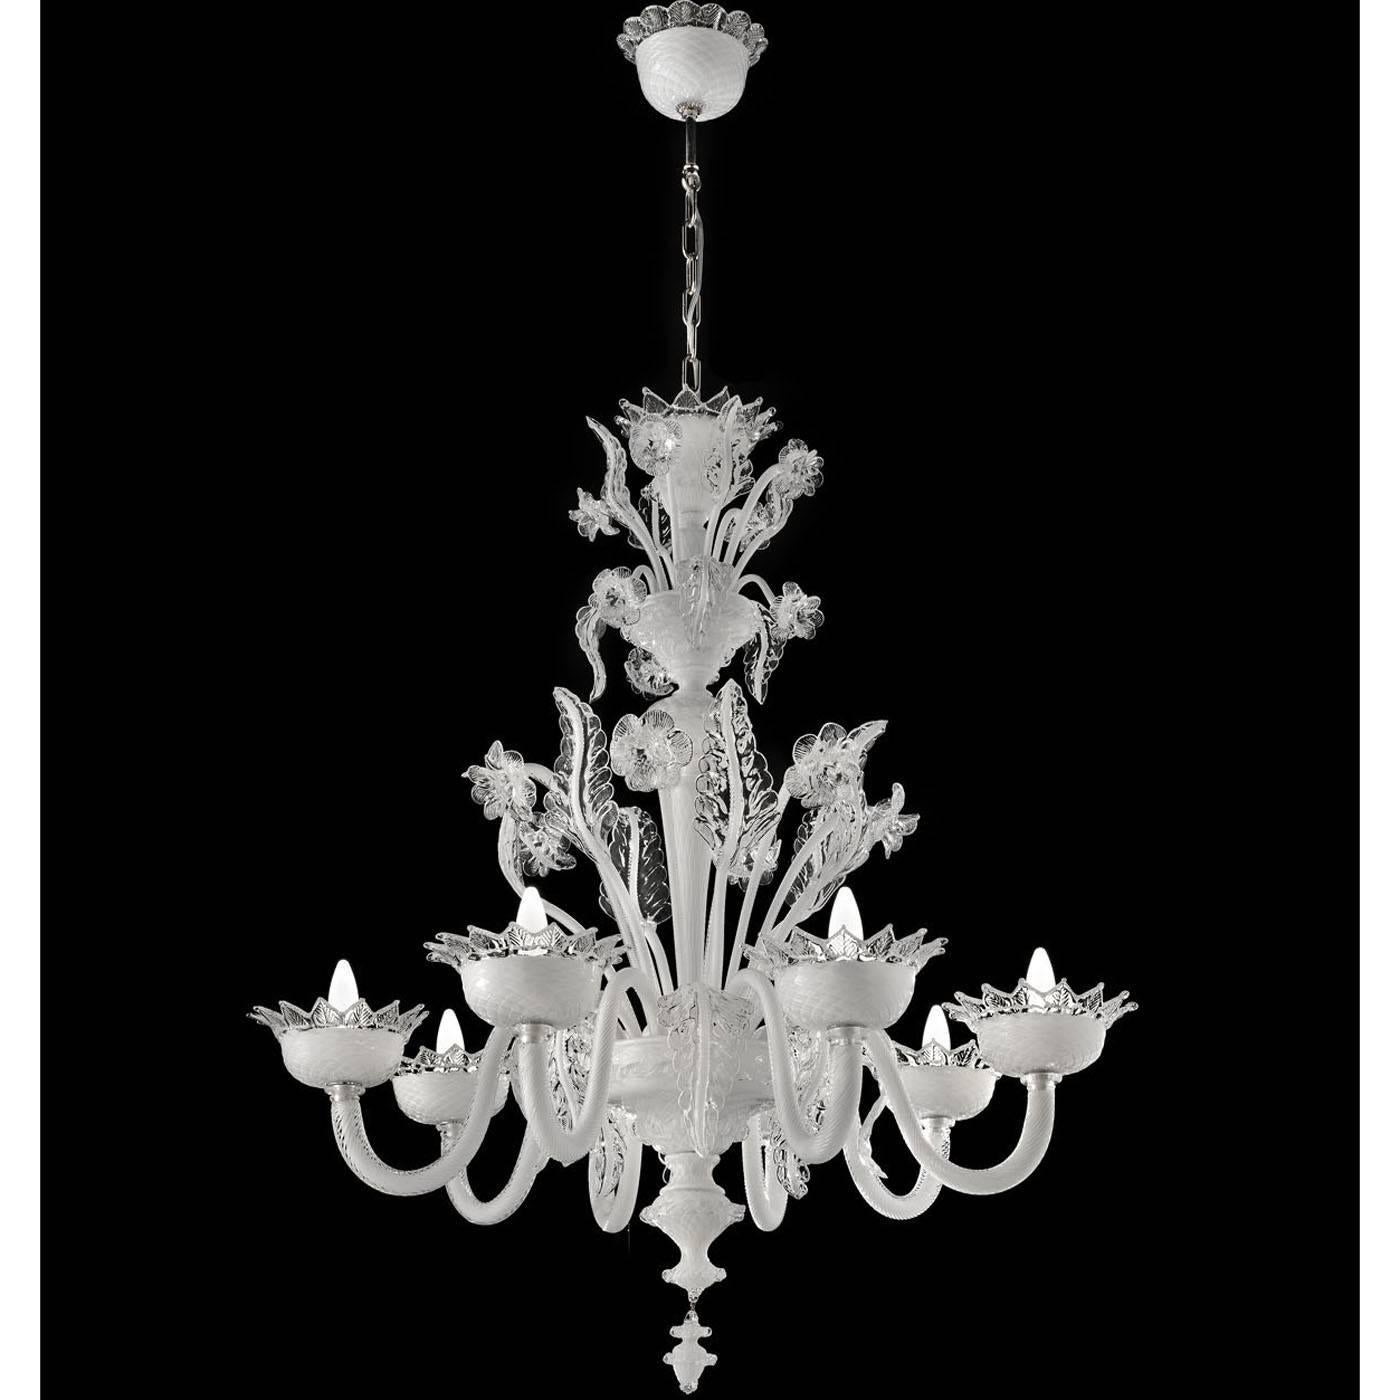 This elegant chandelier is entirely made in Murano glass with six lights supported by sinuous glass arms and adorned at the top with a spectacular decoration of flowers and leaves. This unique object reproduces a 19th century original and its metal